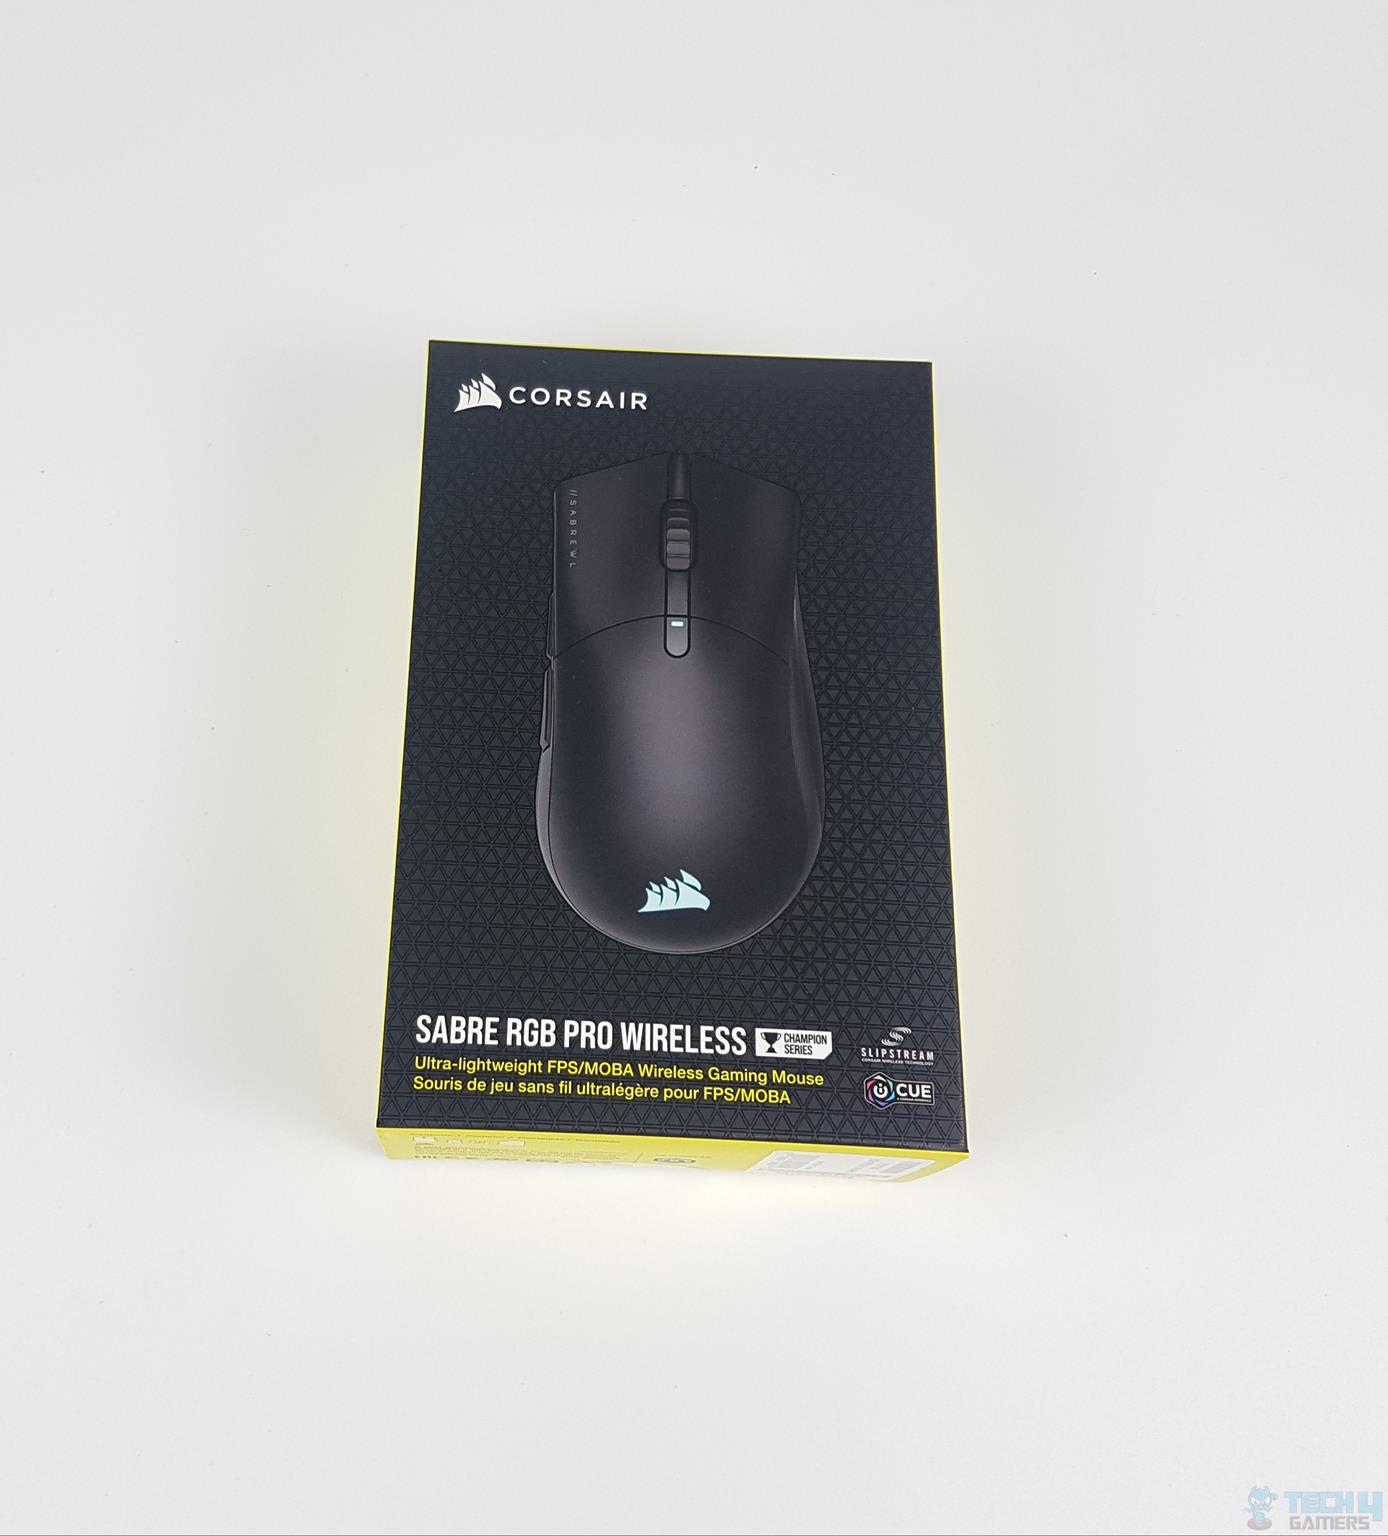 CORSAIR Sabre RGB Pro Wireless Gaming Mouse — Packaging